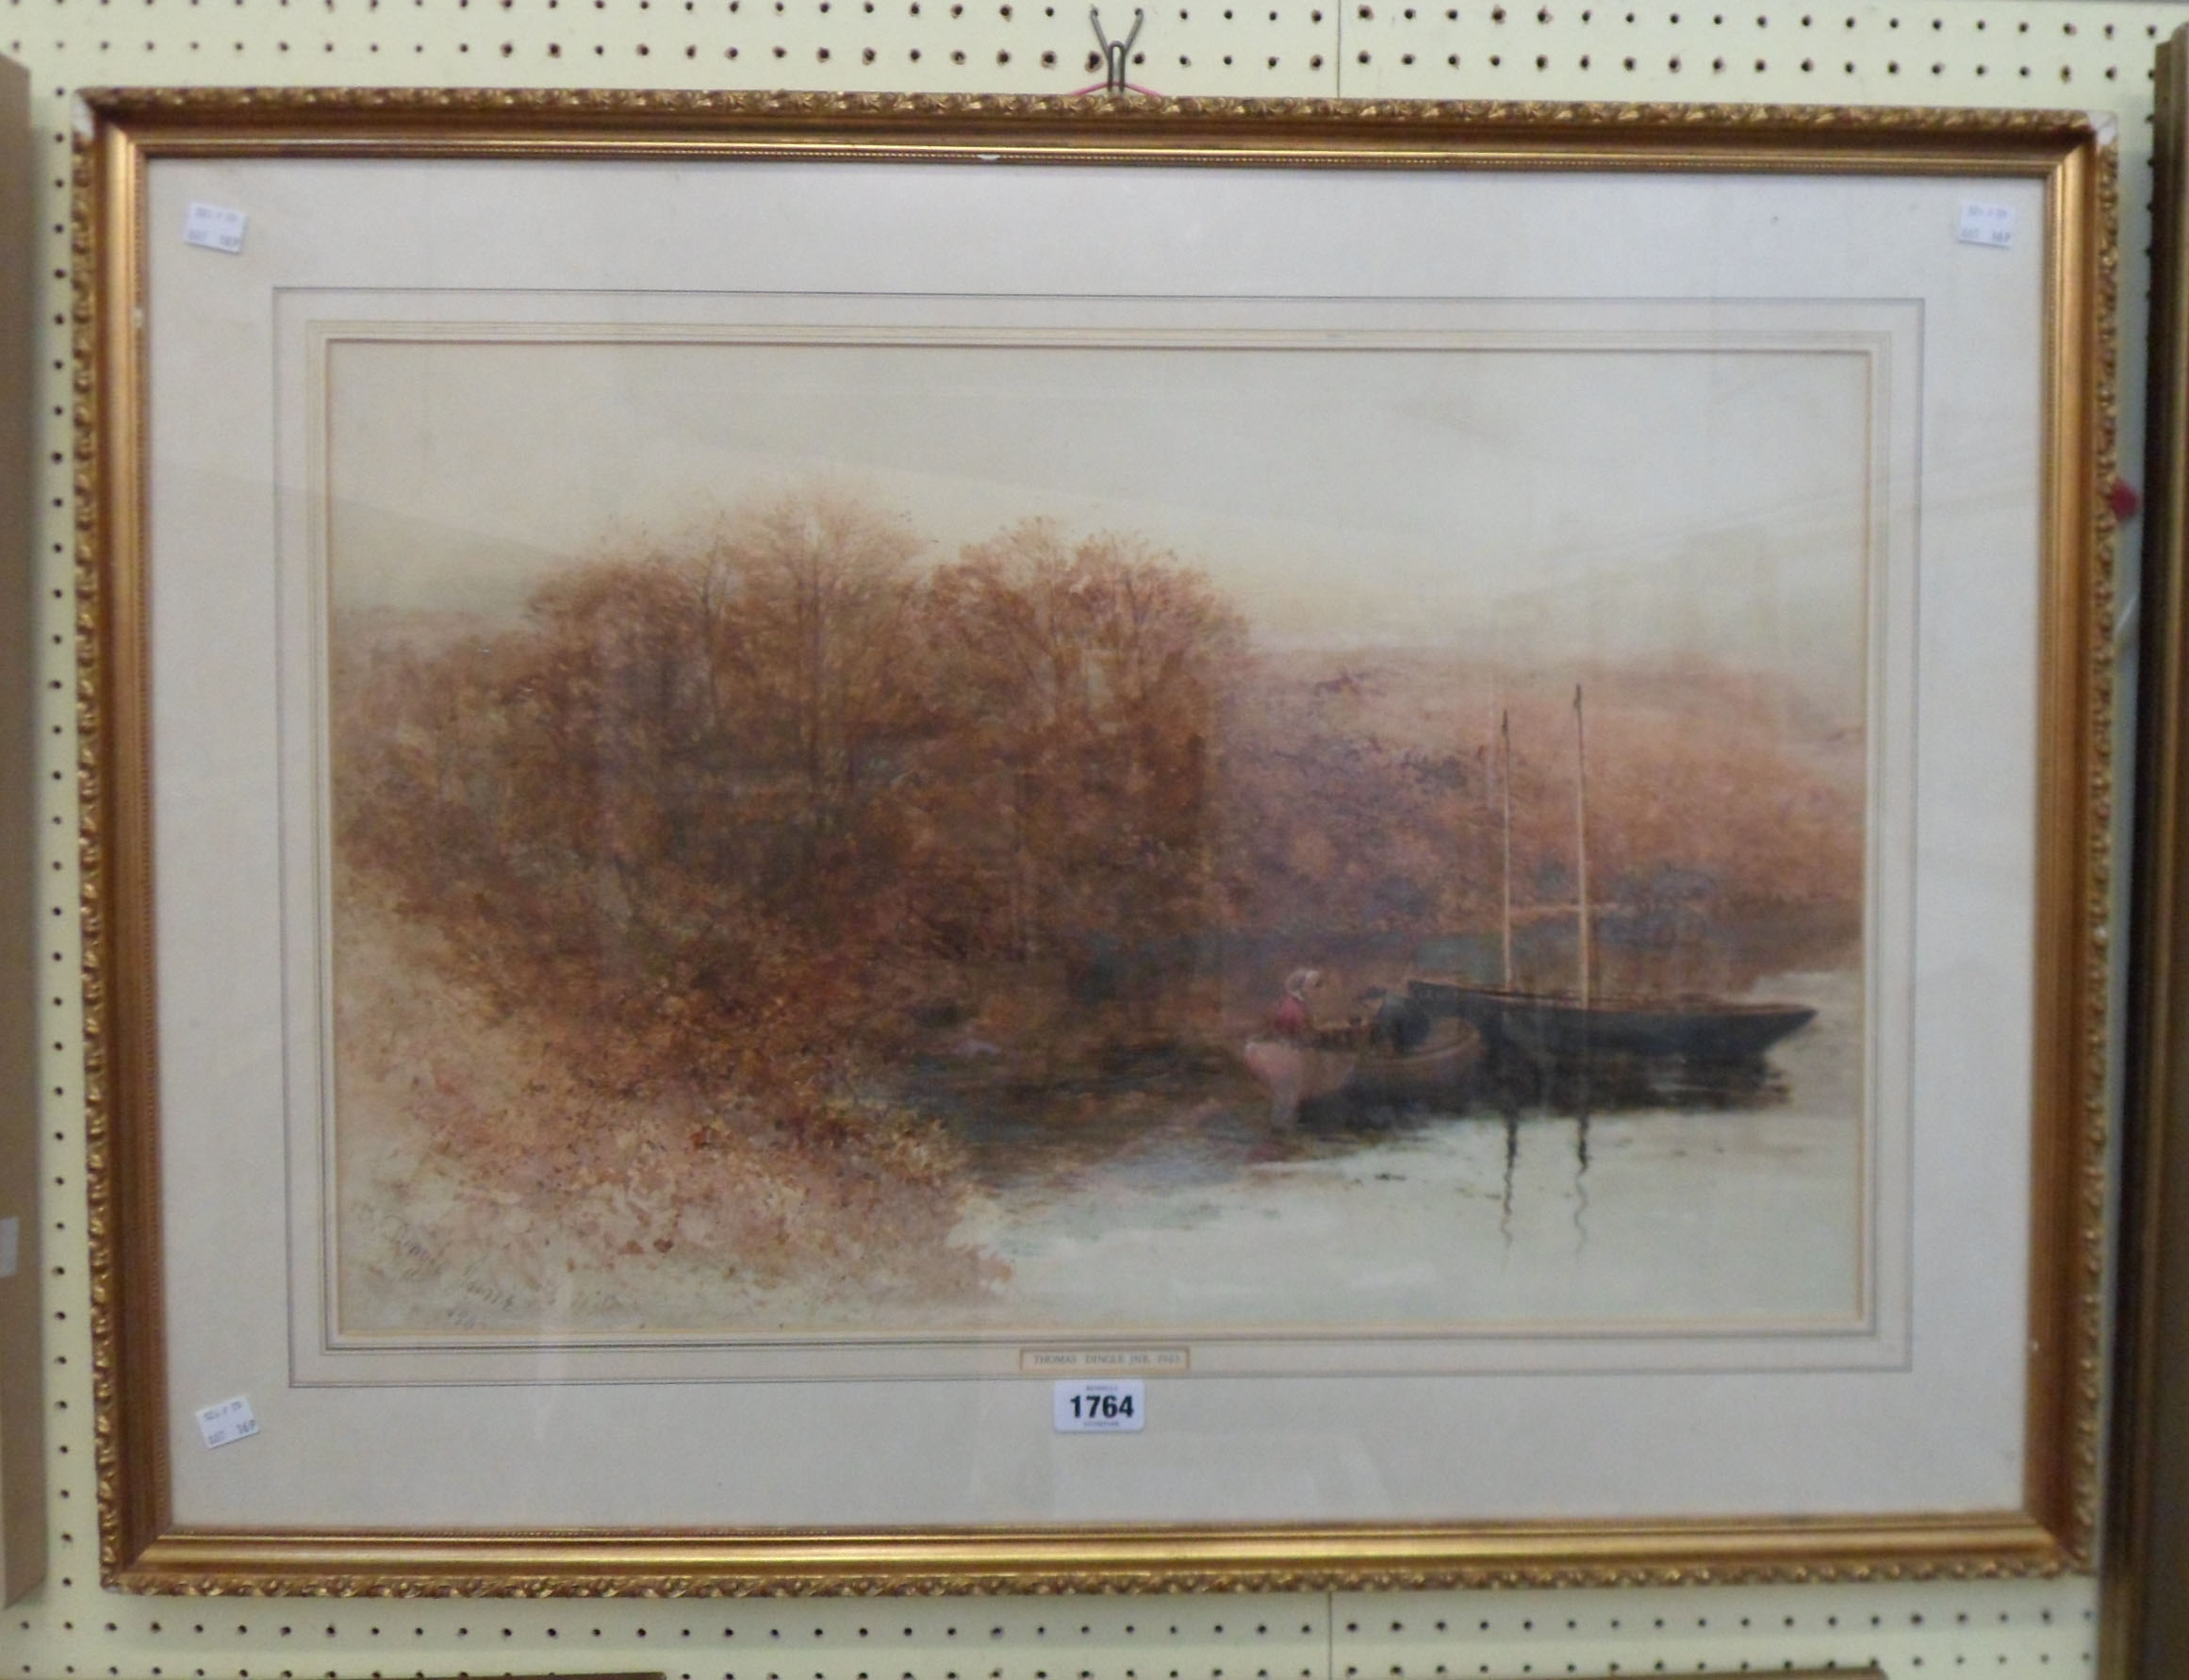 Thomas Dingle Jnr.: a gilt framed watercolour, depicting figures and boats on a river - signed and